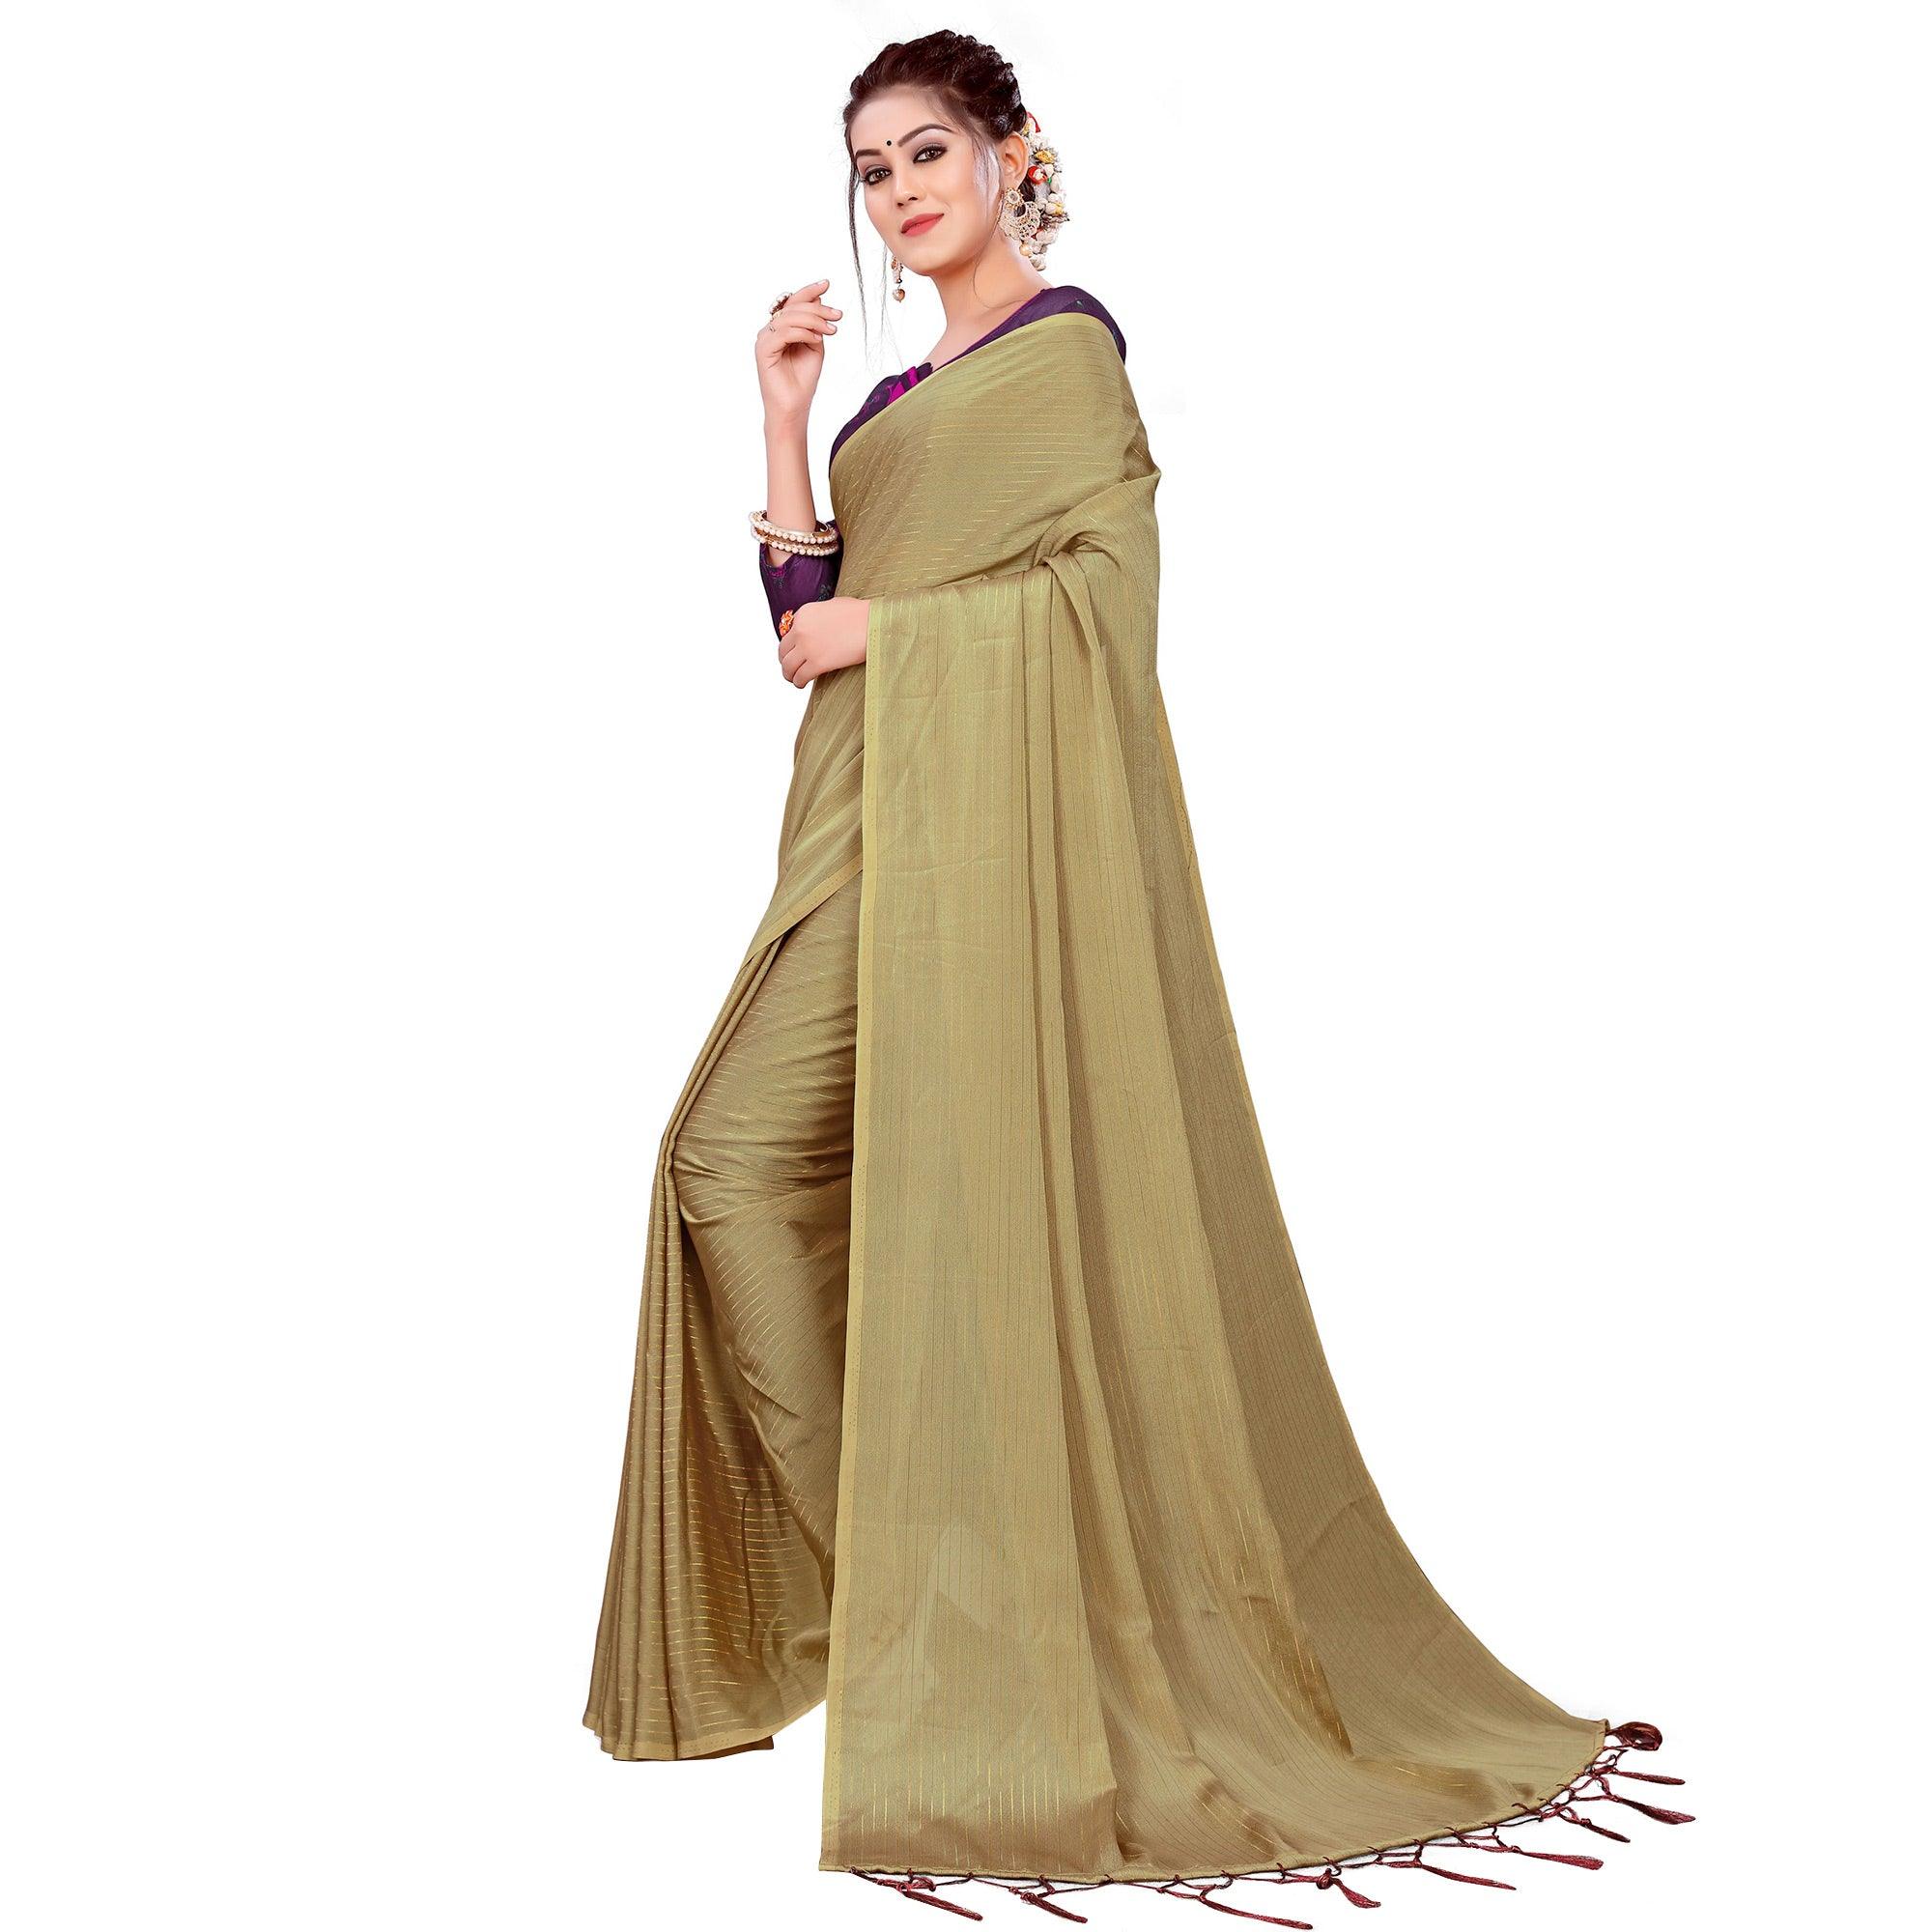 Ethnic Beige Colored Party Wear Printed Georgette Saree With Tassels - Peachmode